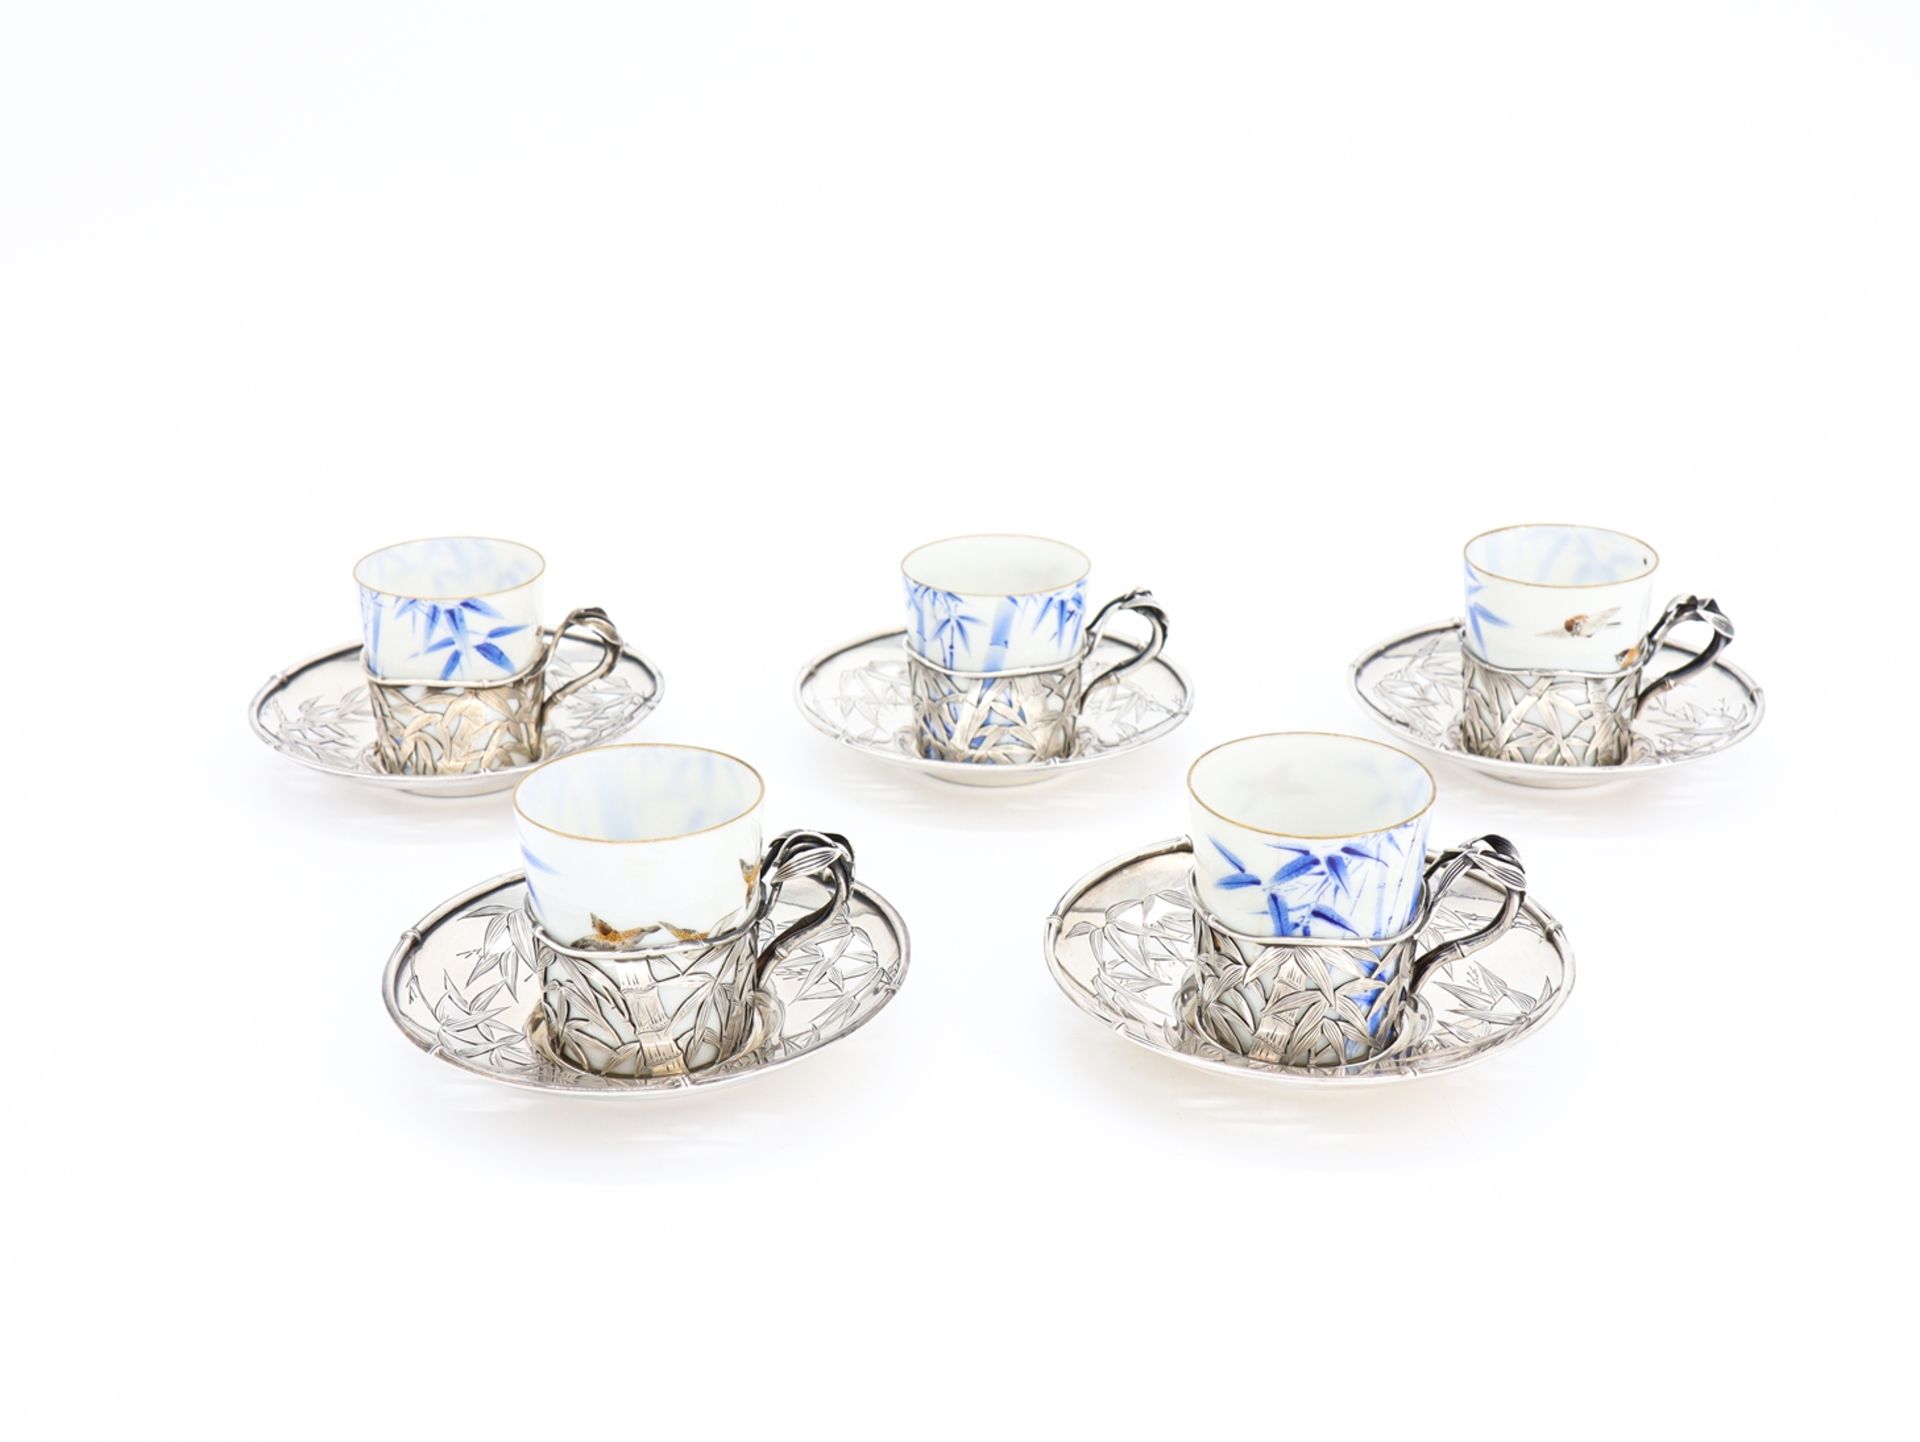 5 Cups, Chinese Export Silver, Porcelain, Crane Motif, China, c. 1900 - Image 8 of 9